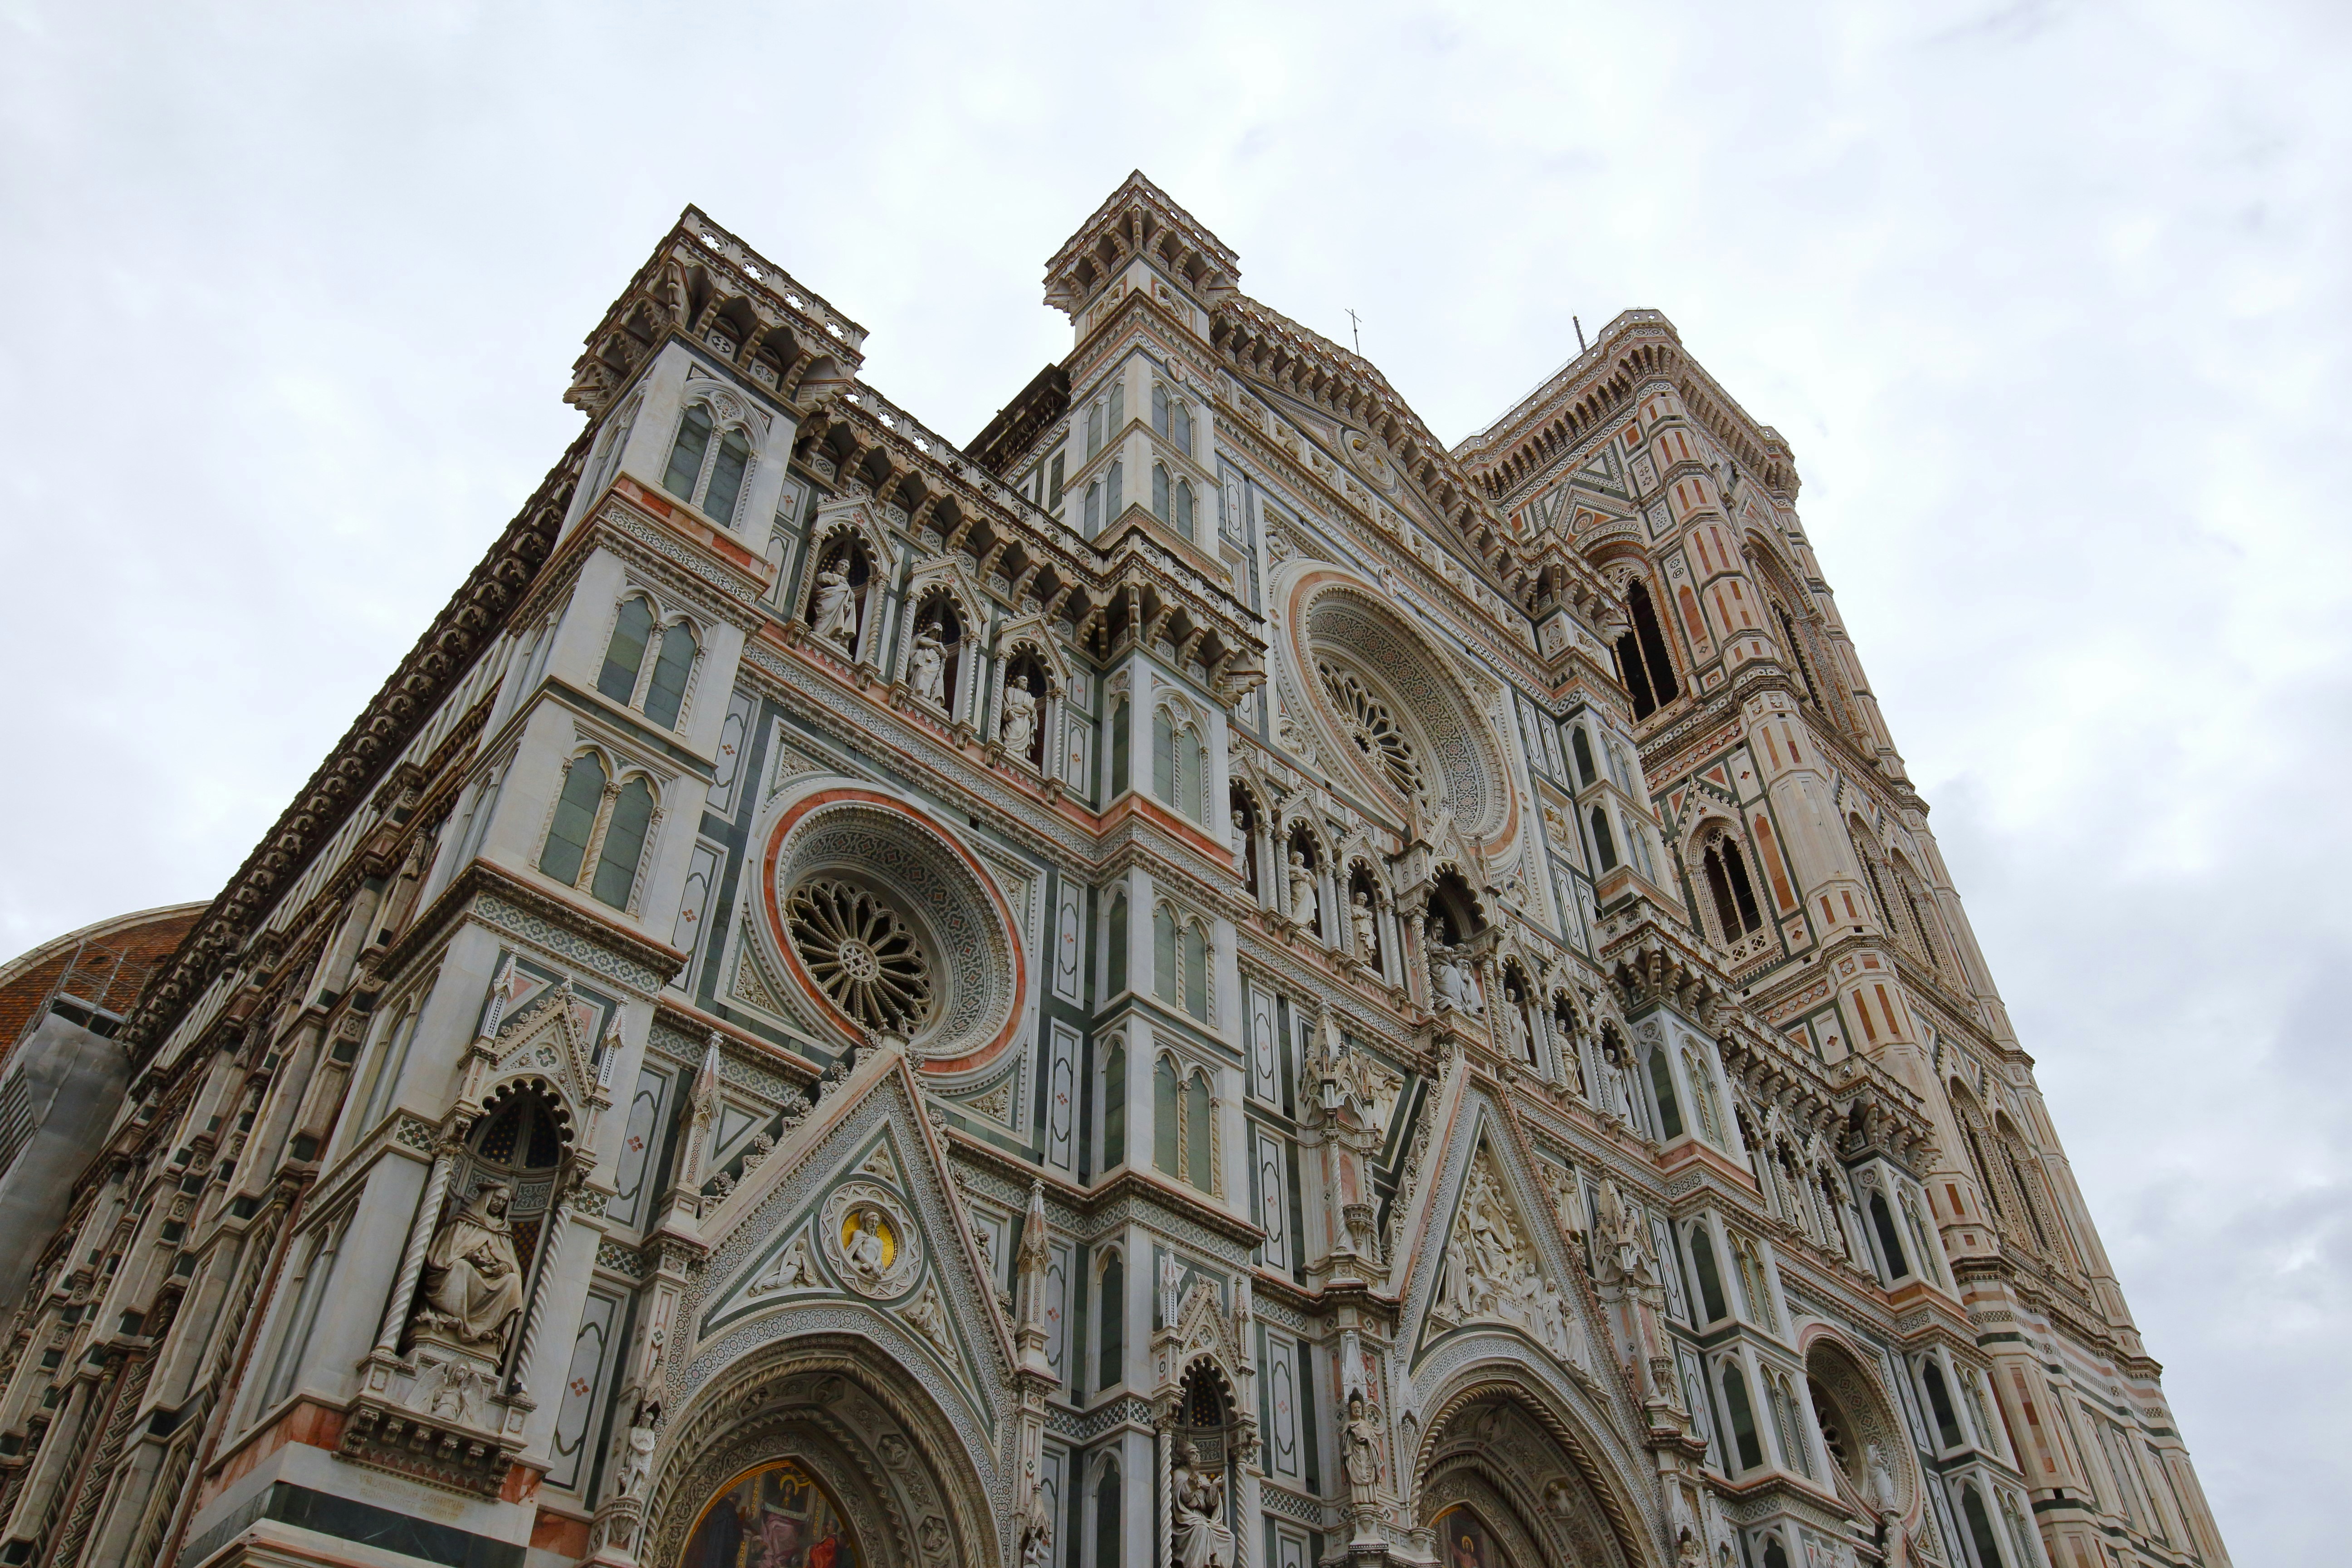 The front facade of the Cathedral of Santa Maria del Fiore